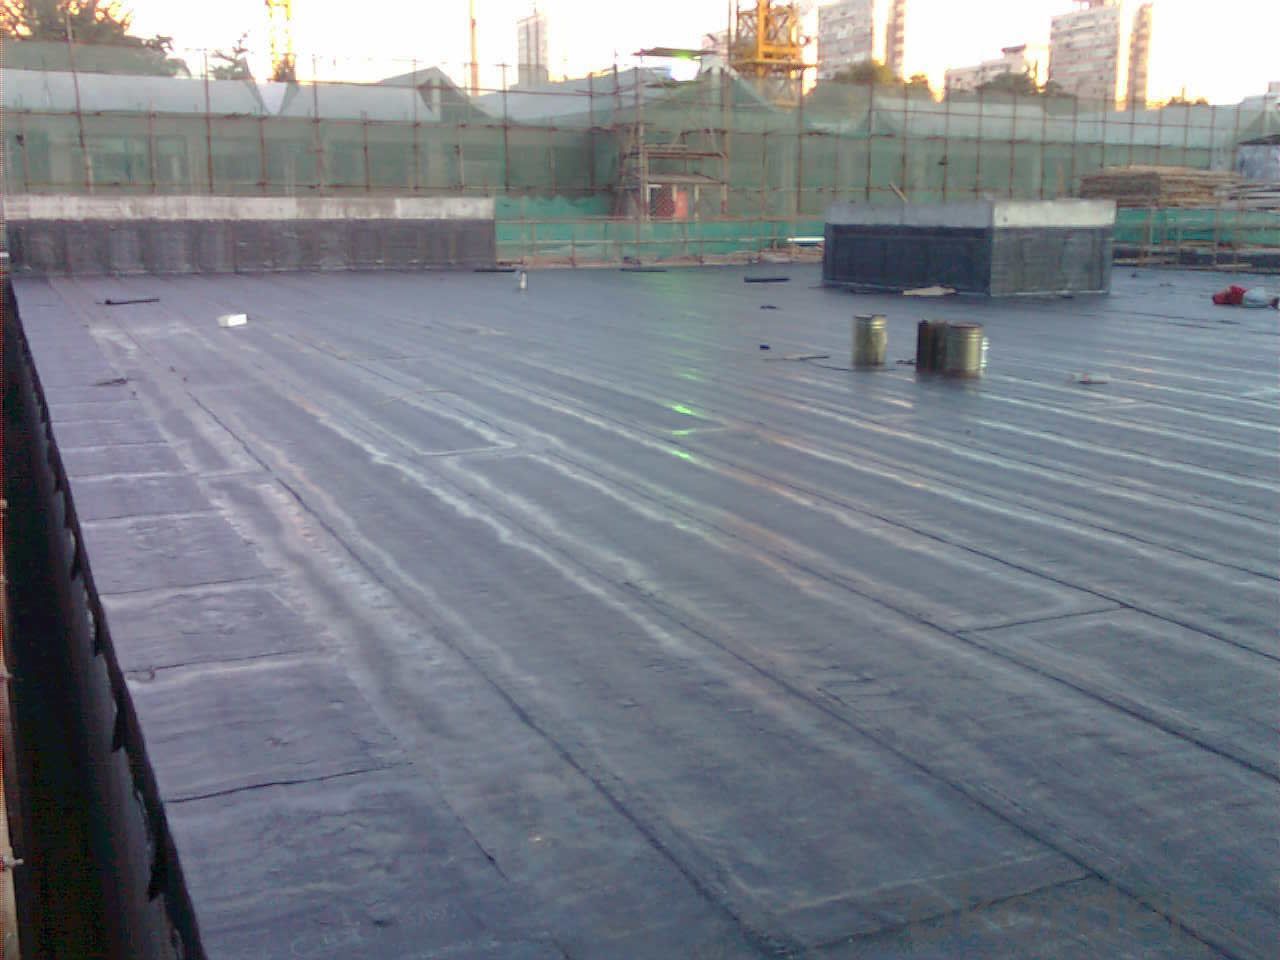 EPDM Coiled Waterproof Membrane with 2.0mm Thickness